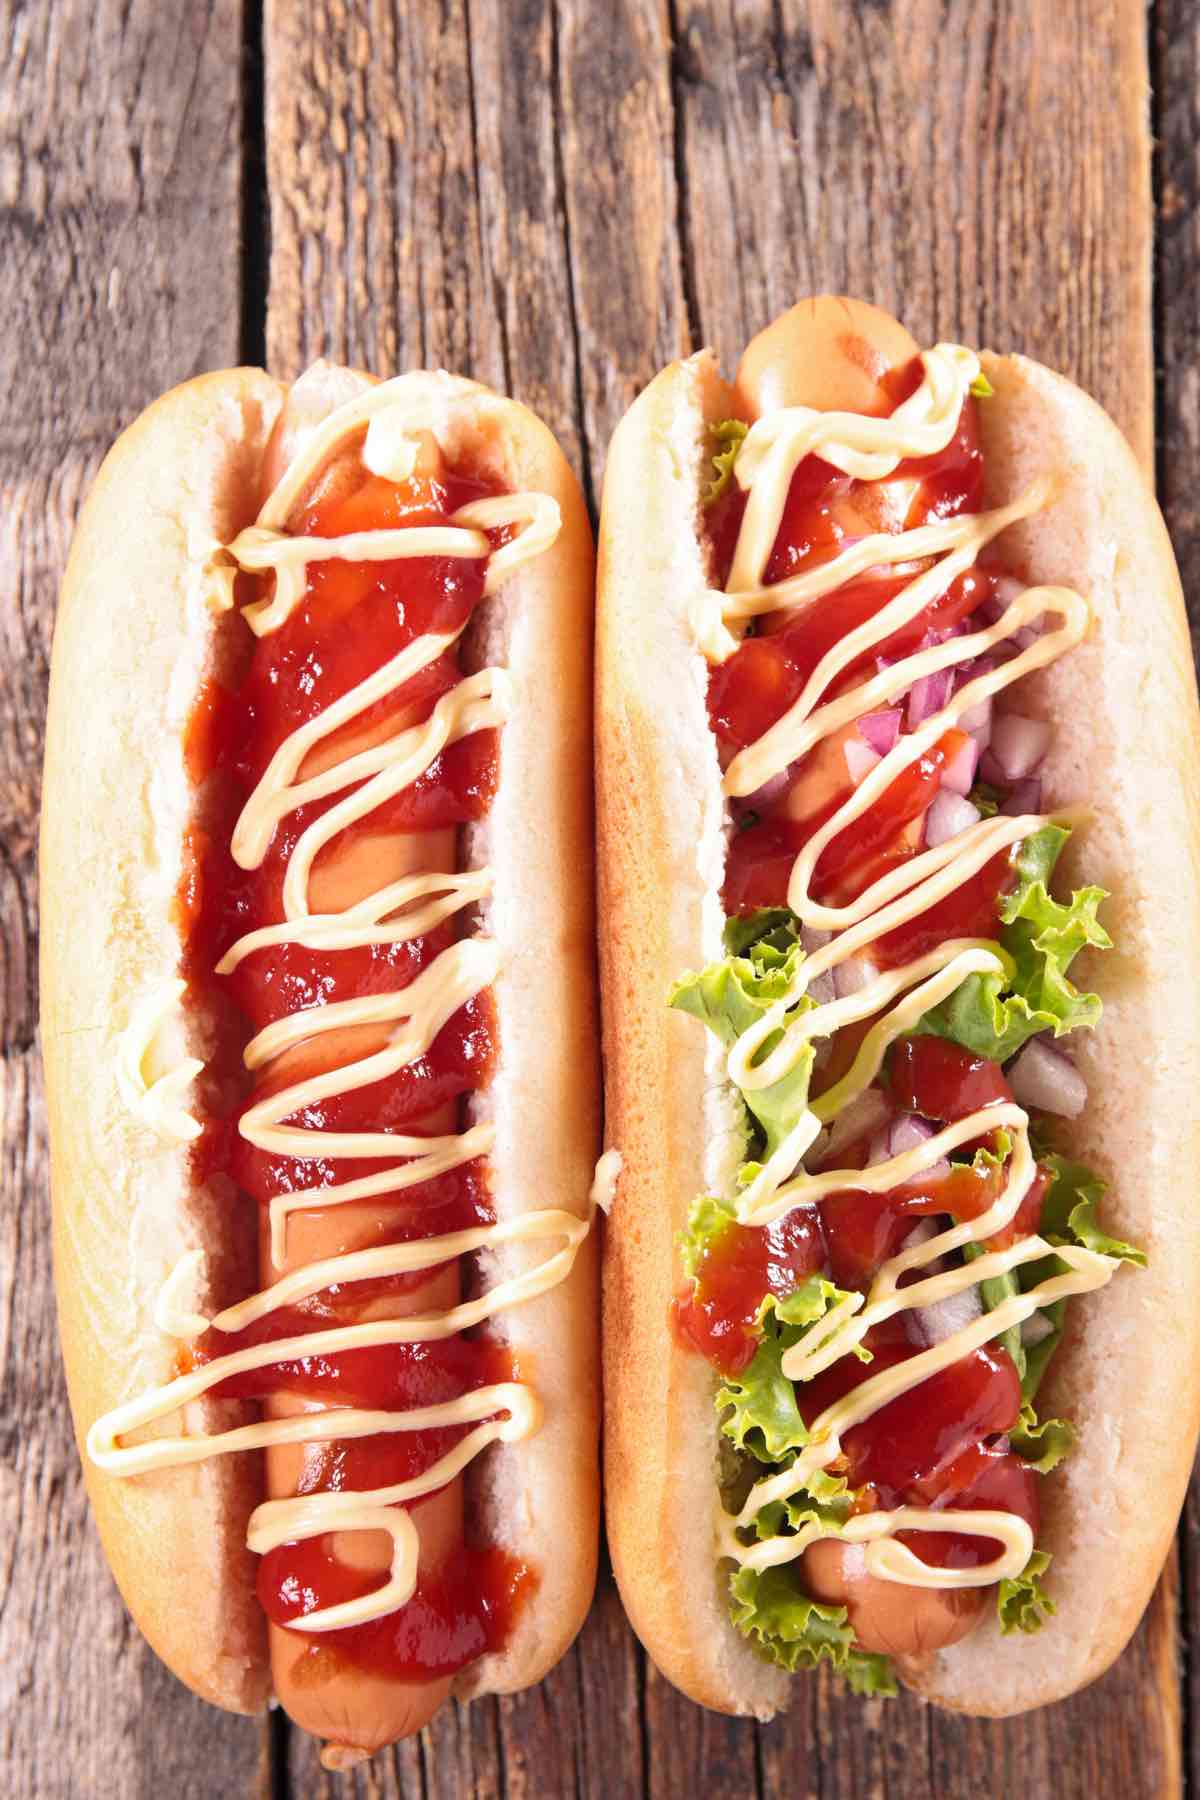 Did you know the fastest way to cook a hot dog is in Microwave? Learn how long to microwave a hot dog so that it comes out perfectly every time (and to prevent exploding!)